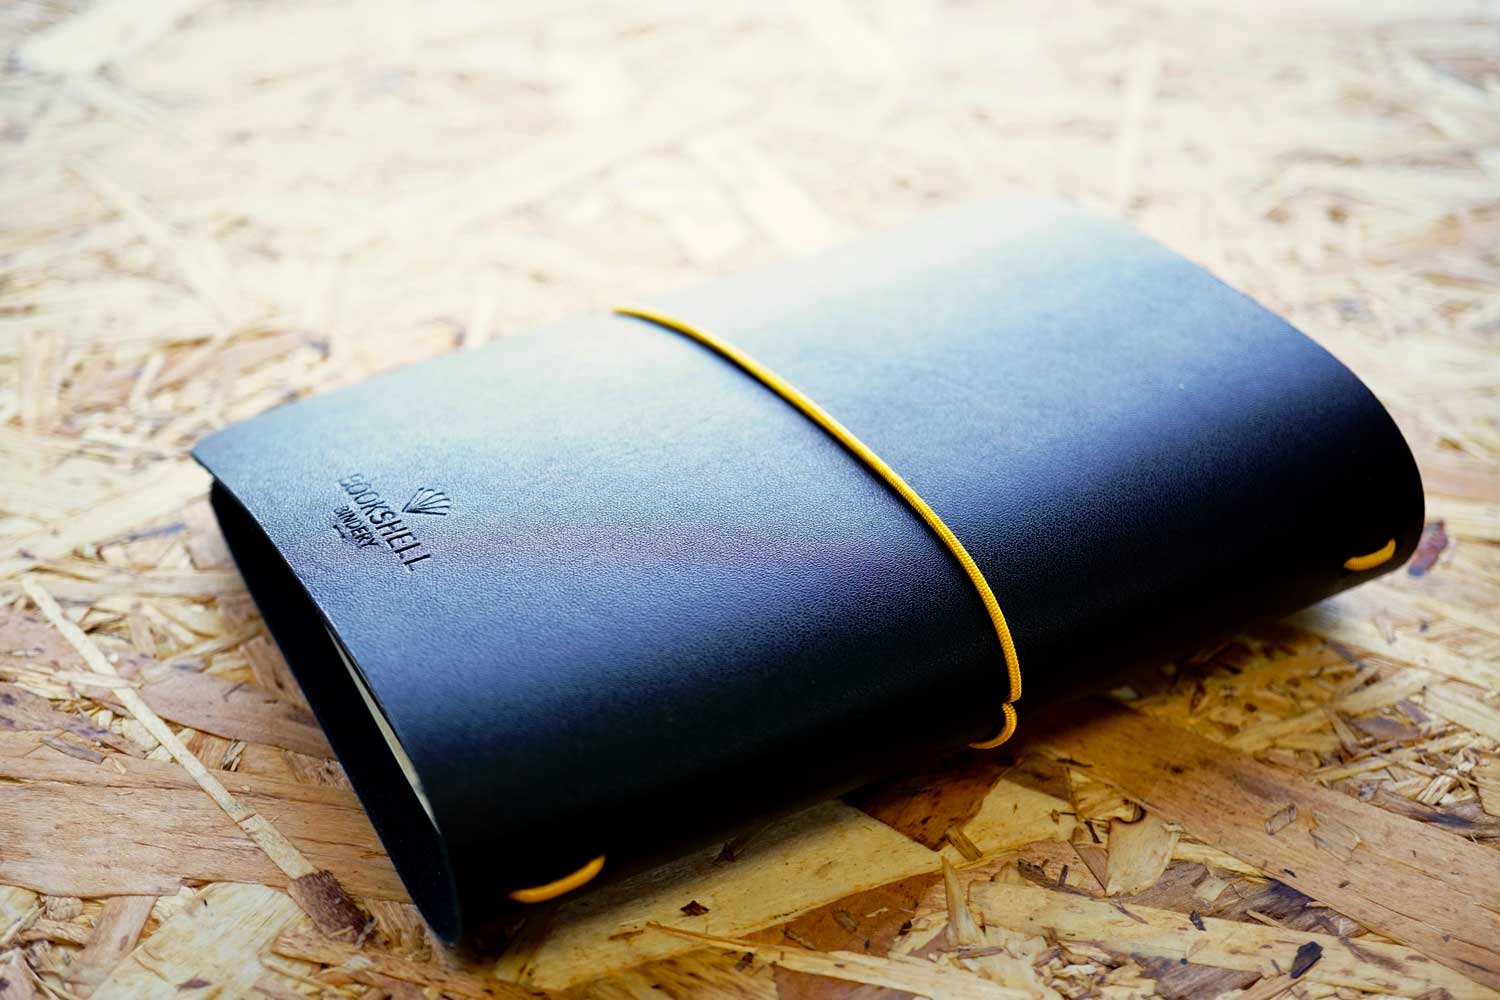 Never-ending journal, Explore. Dream. Discover; A6 leather travel journal with gold foiled compass on the cover, show the back cover